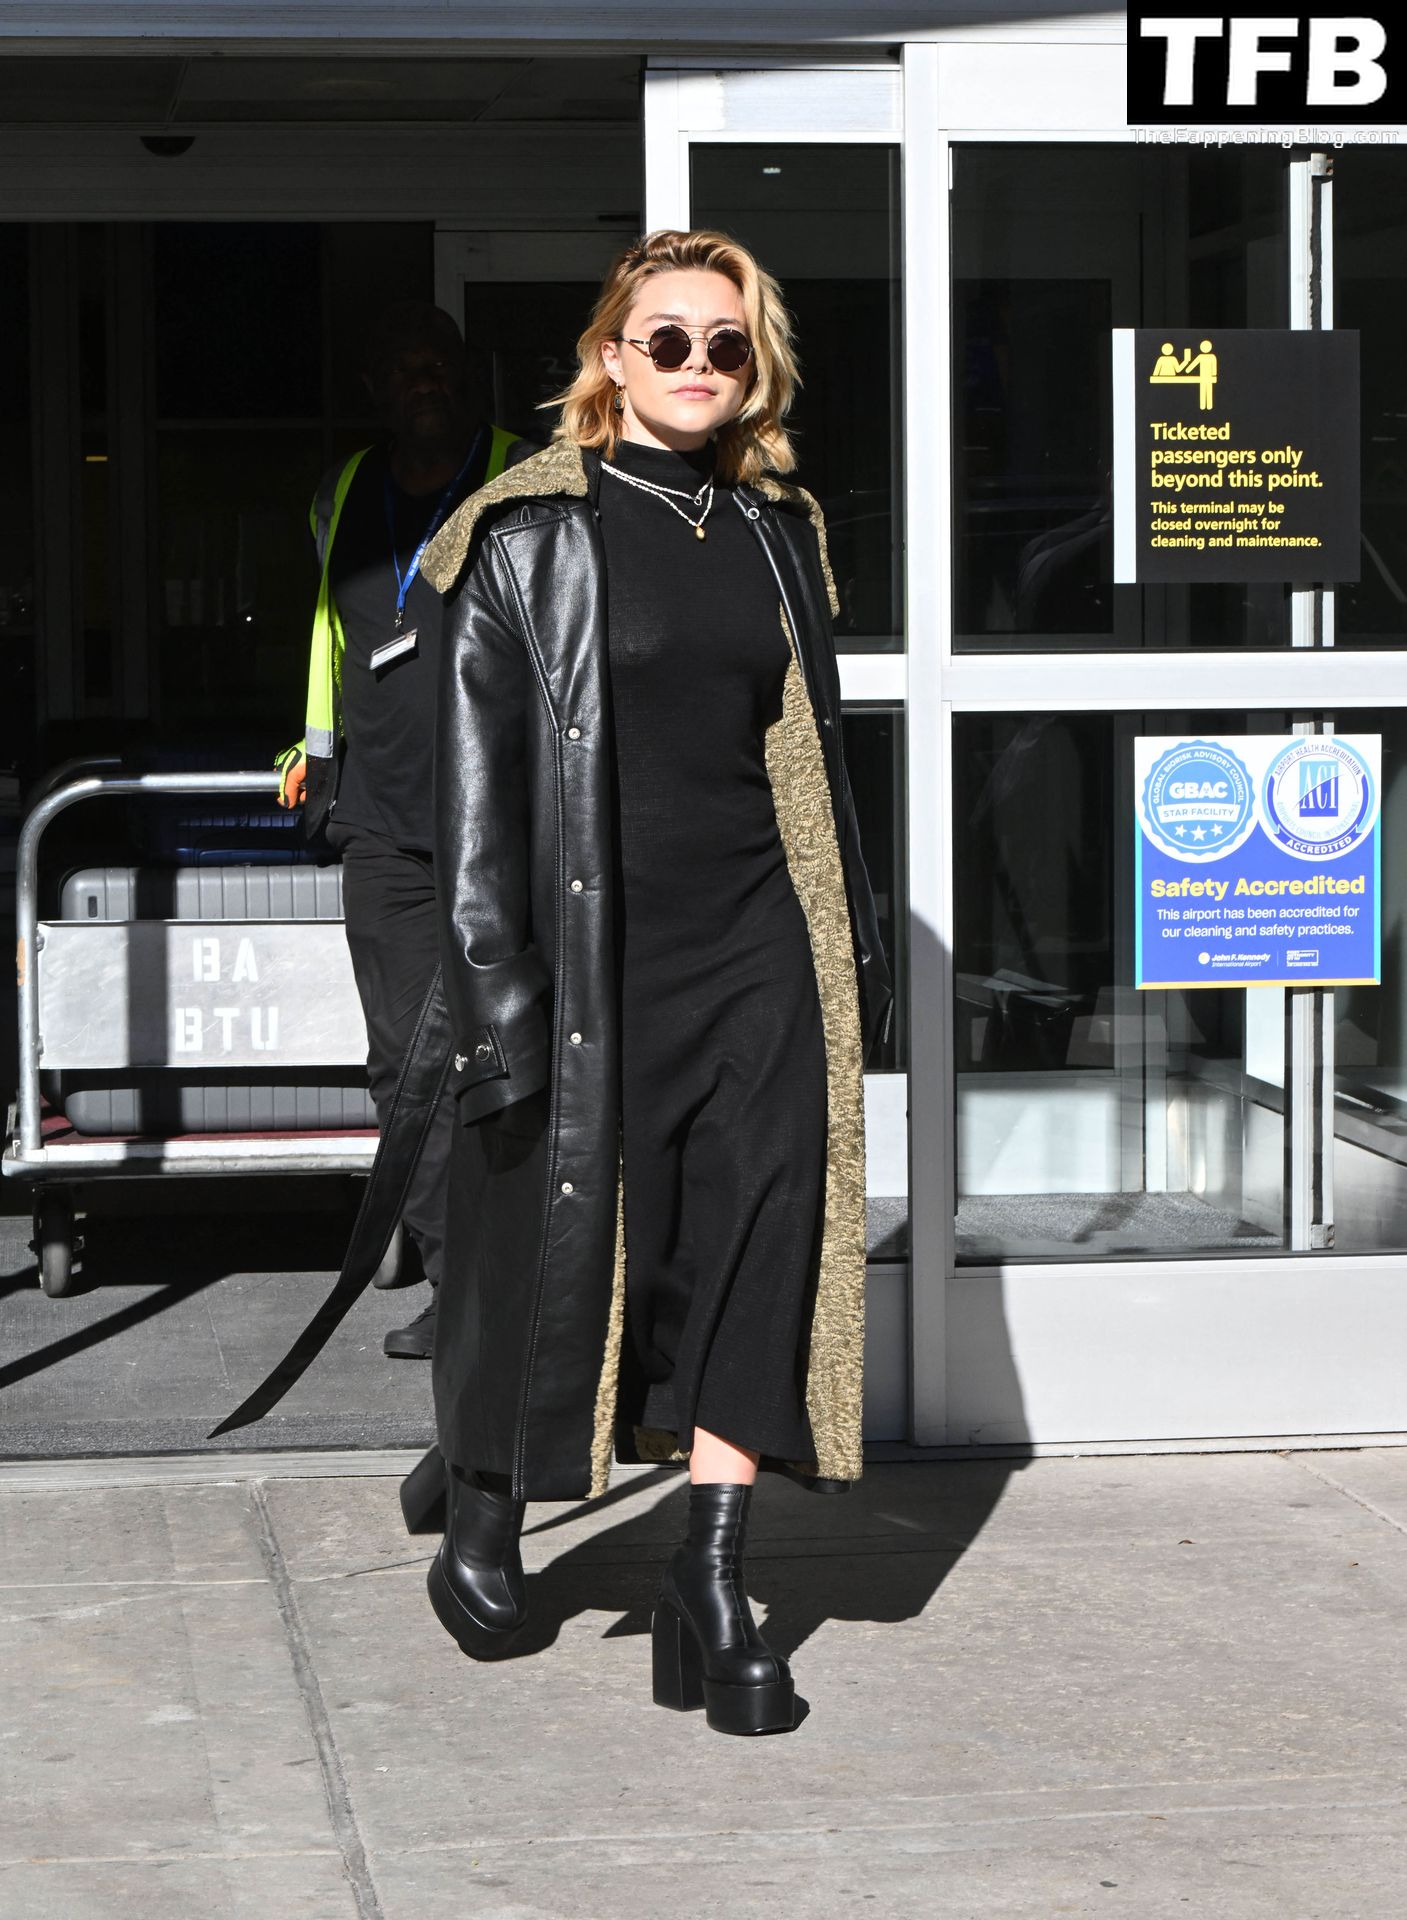 Florence Pugh Pokies The Fappening Blog 14 - Florence Pugh Shows Off Her Pokies at JFK airport in NYC (31 Photos)